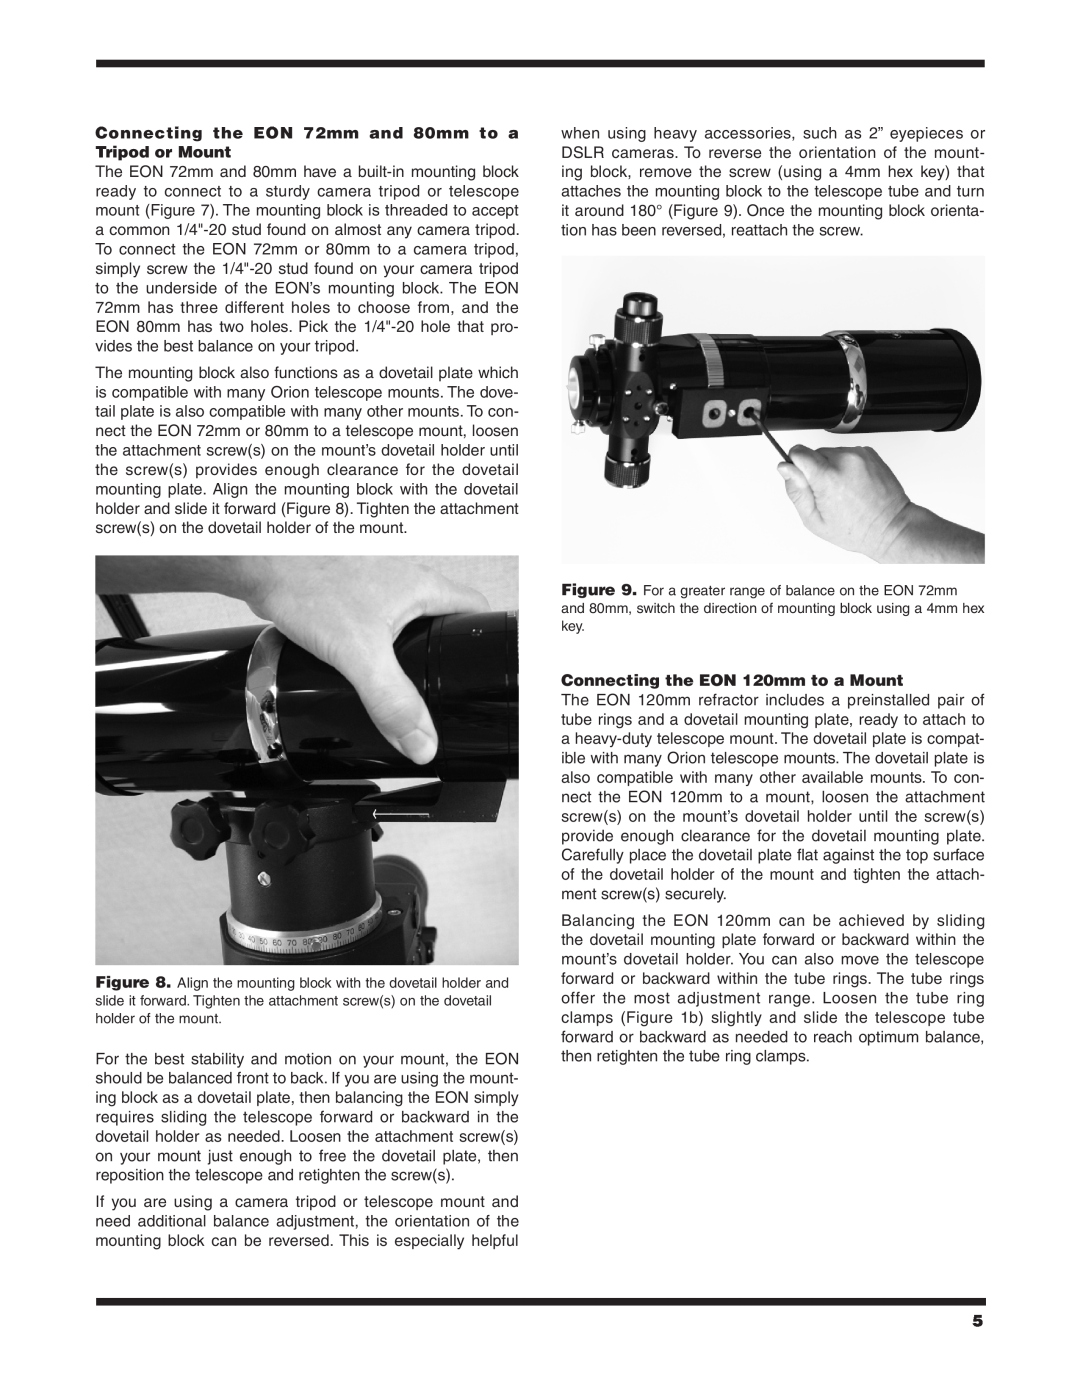 Orion #9781 EON 72MM instruction manual Connecting the EON 120mm to a Mount 